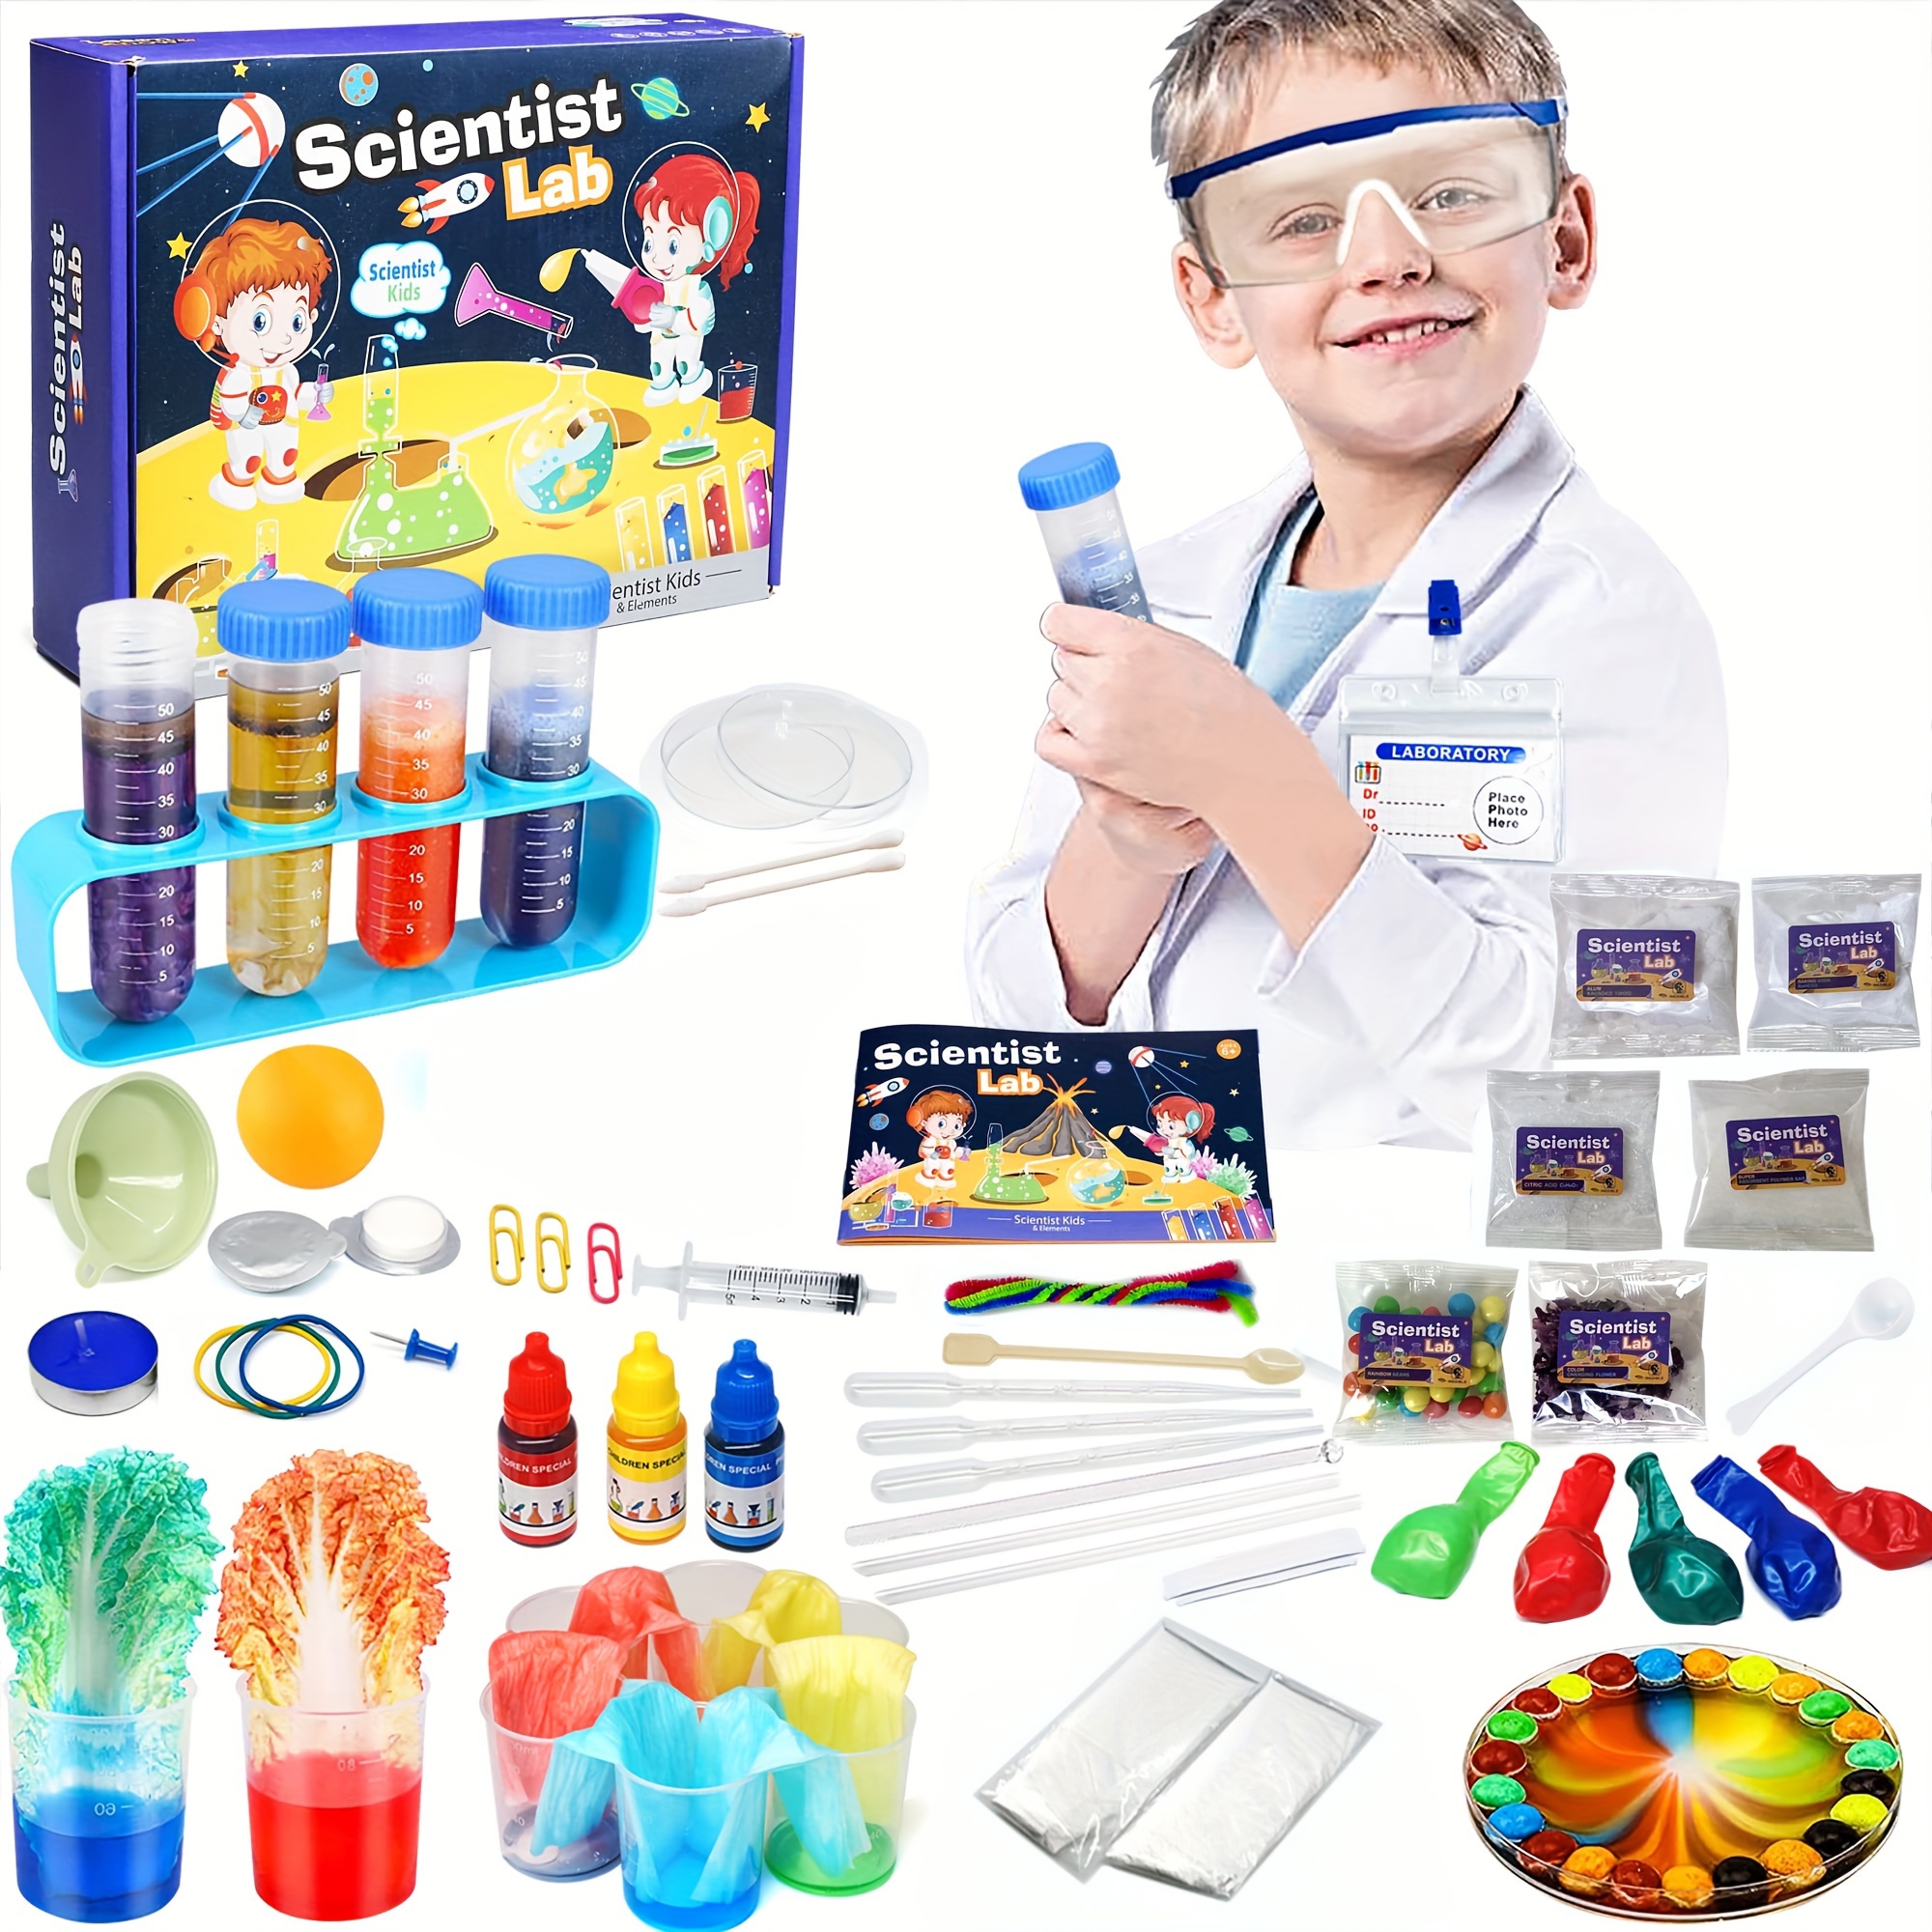 Crystal Growing Kit, Arts and Crafts Science Kits for Kids 4-6-8-12, Toys  for